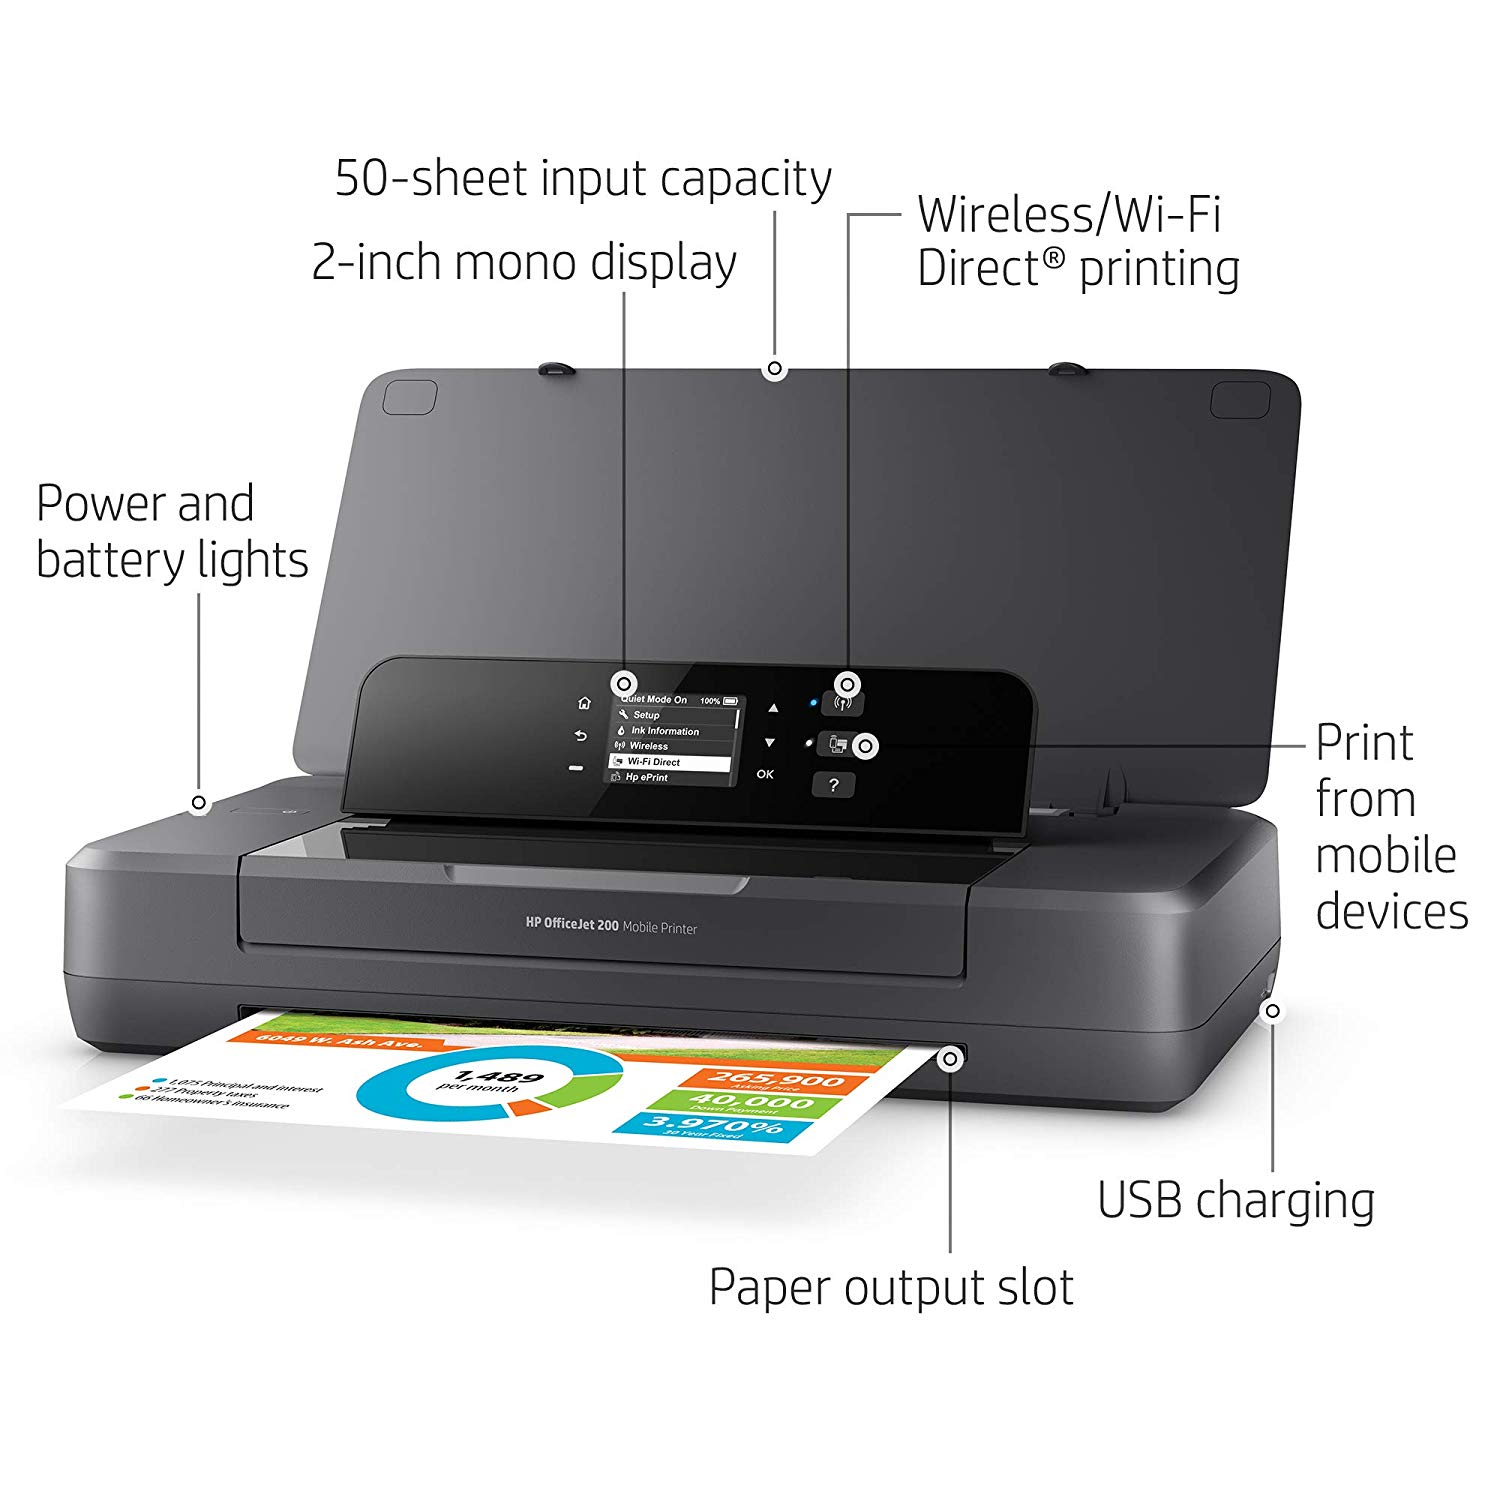 HP OfficeJet 200 Portable Printer with Wireless & Mobile Printing